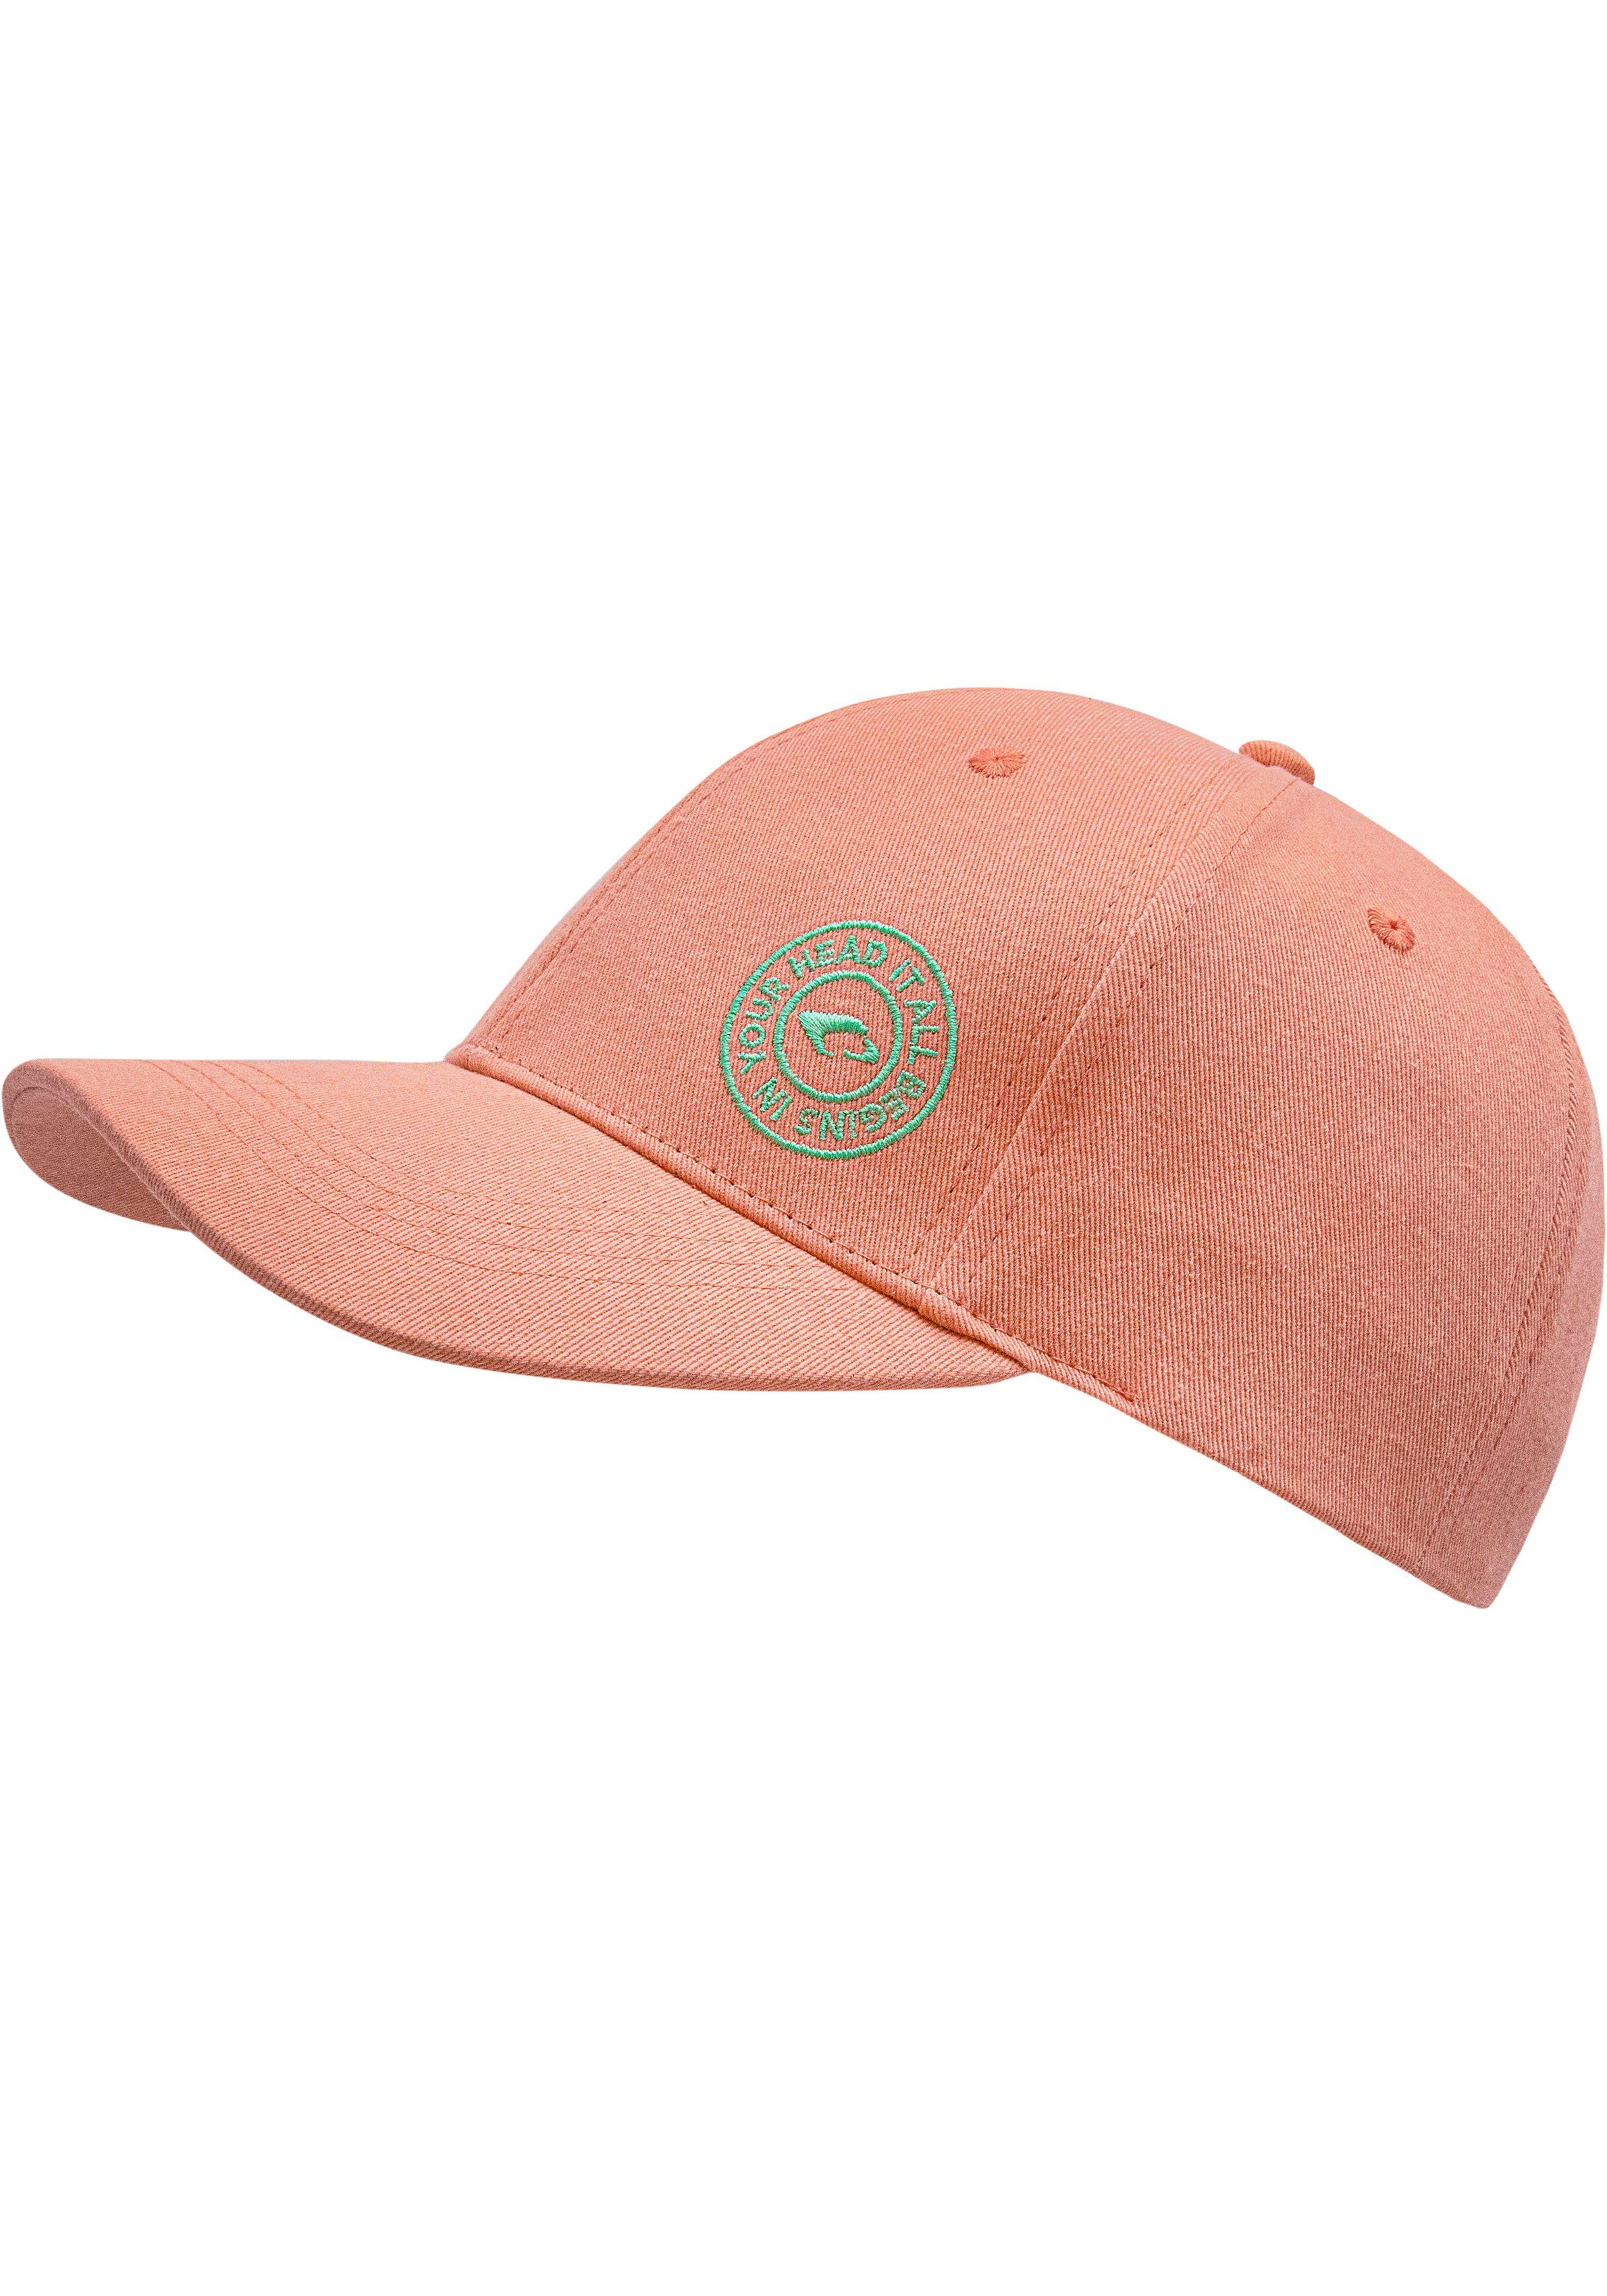 Baseball chillouts Hat Cap Arklow coral